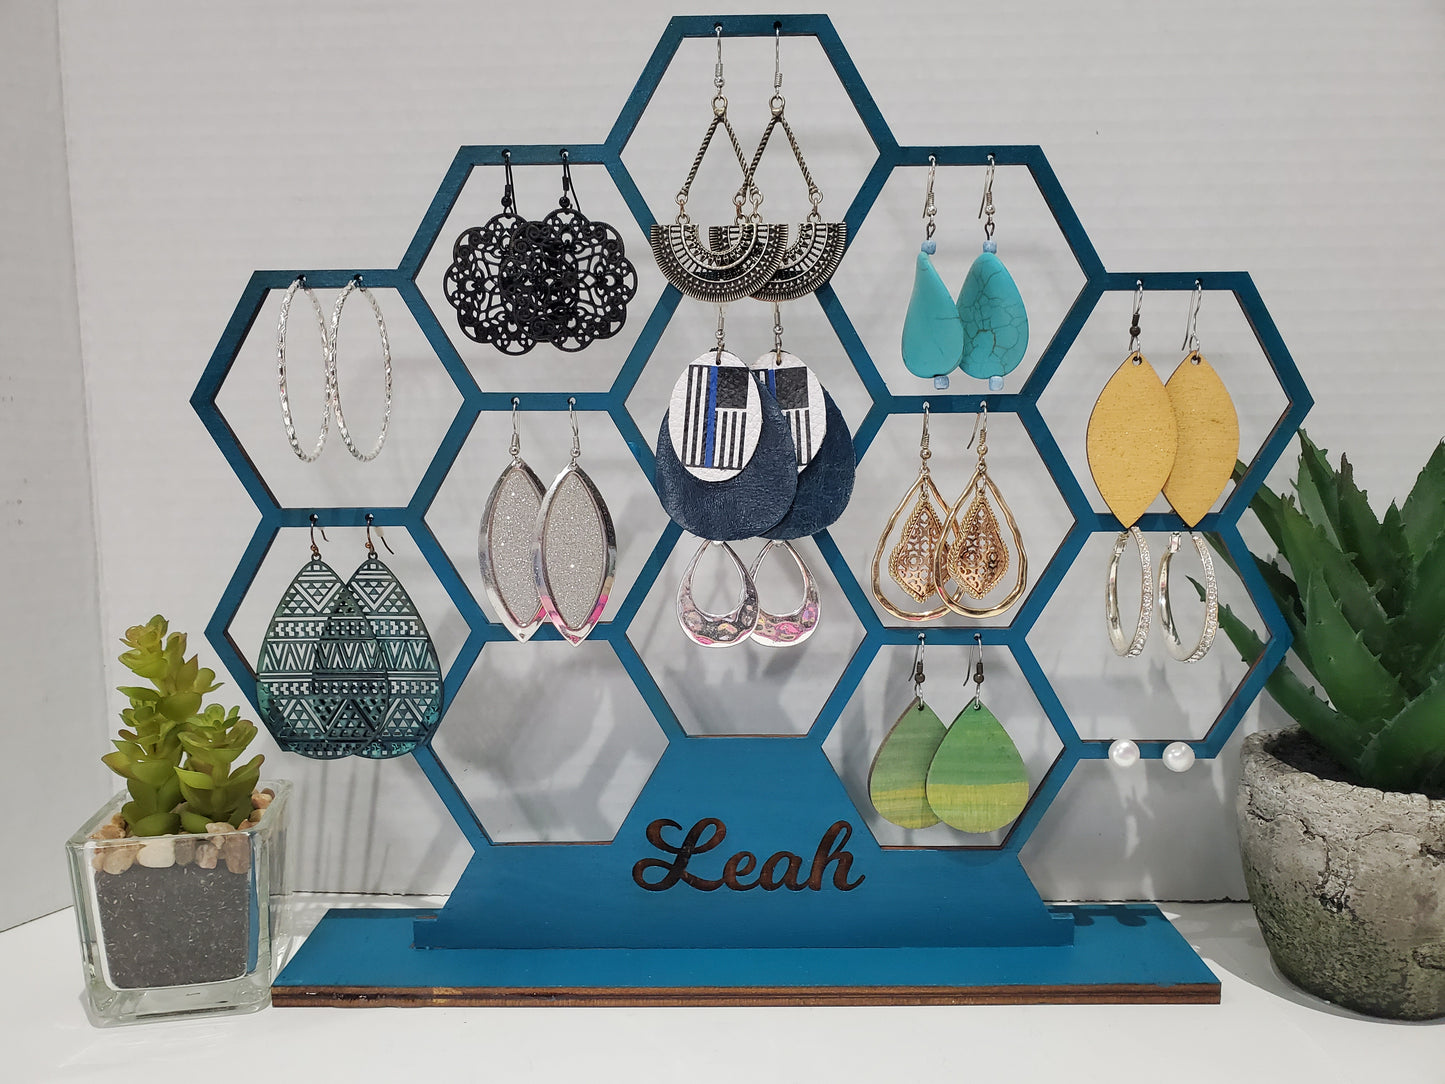 Earring Holder/Stand - Holds up to15  pairs of earrings!